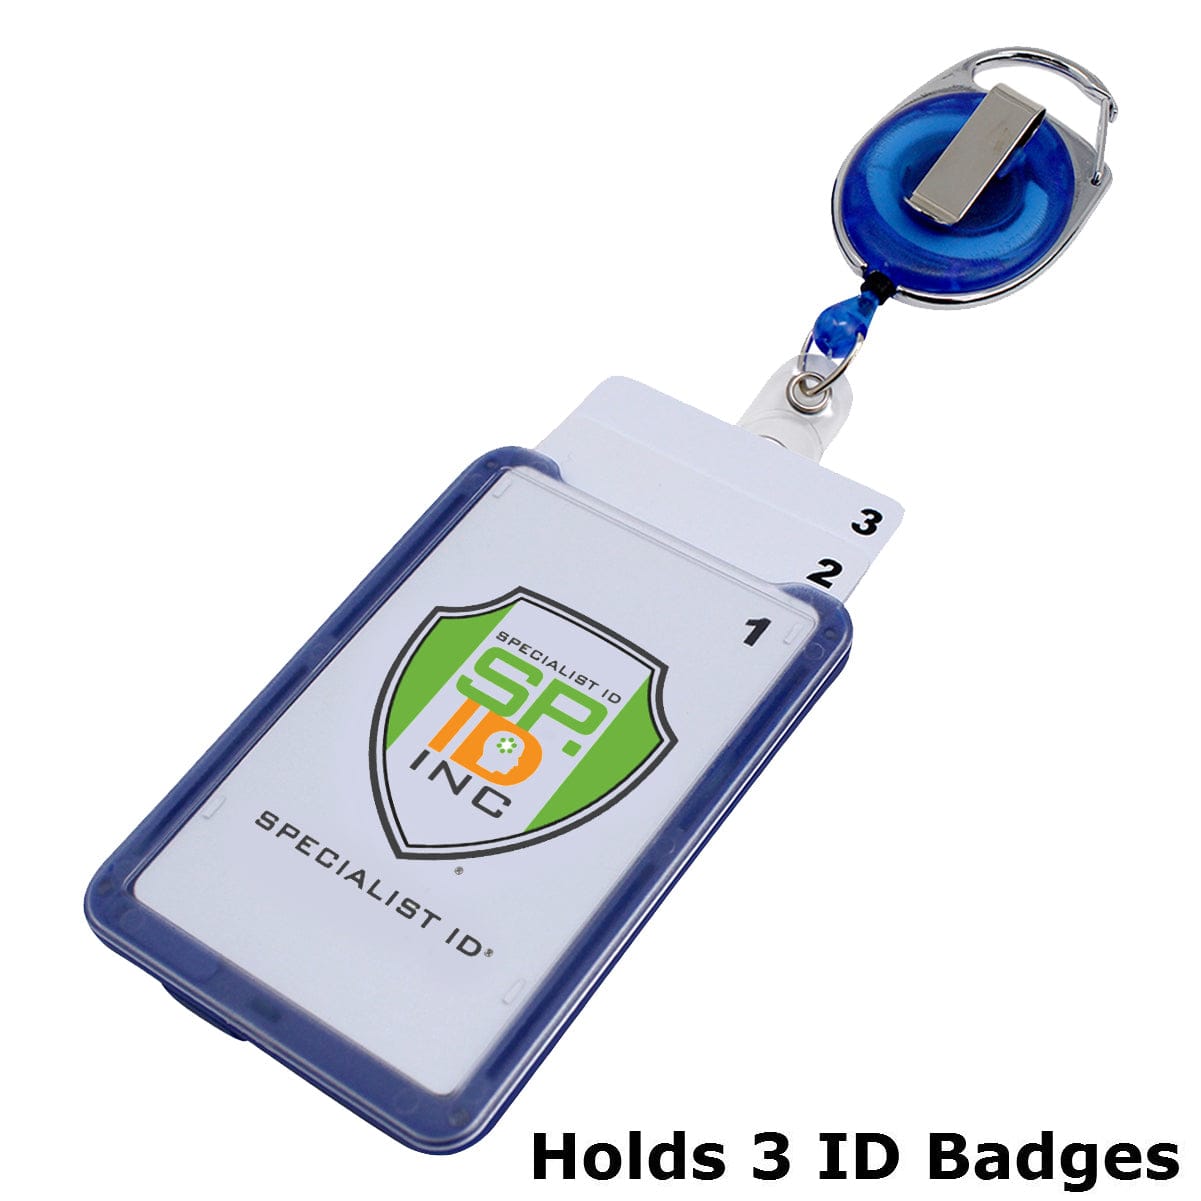 A Hard Plastic 3 Card Badge Holder with Badge Reel - Retractable ID Lanyard Features Belt Clip & Carabiner - Rigid Vertical CAC Holder - Top Load Holds Three Cards by SpecialistID contains three ID badges labeled 1, 2, and 3. It features an attached retractable badge reel. Text at the bottom reads "Holds 3 ID Badges.